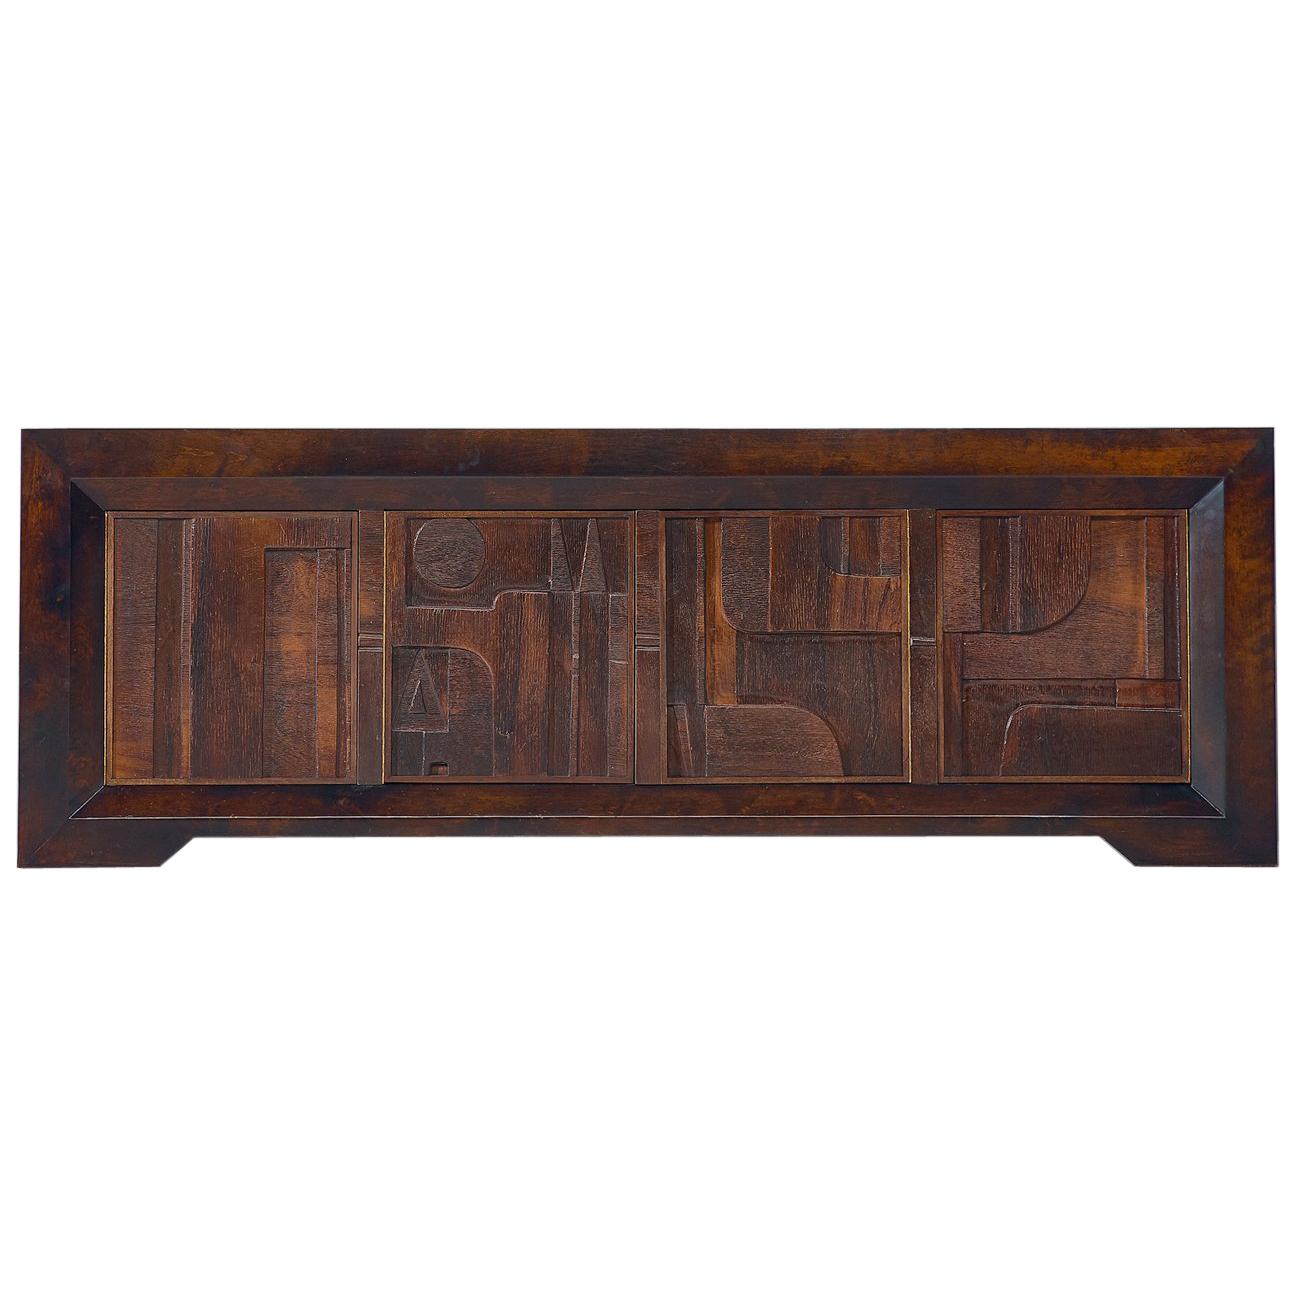 Nerone and Patuzzi for Gruppo NP2 Constructivism Wooden Sideboard